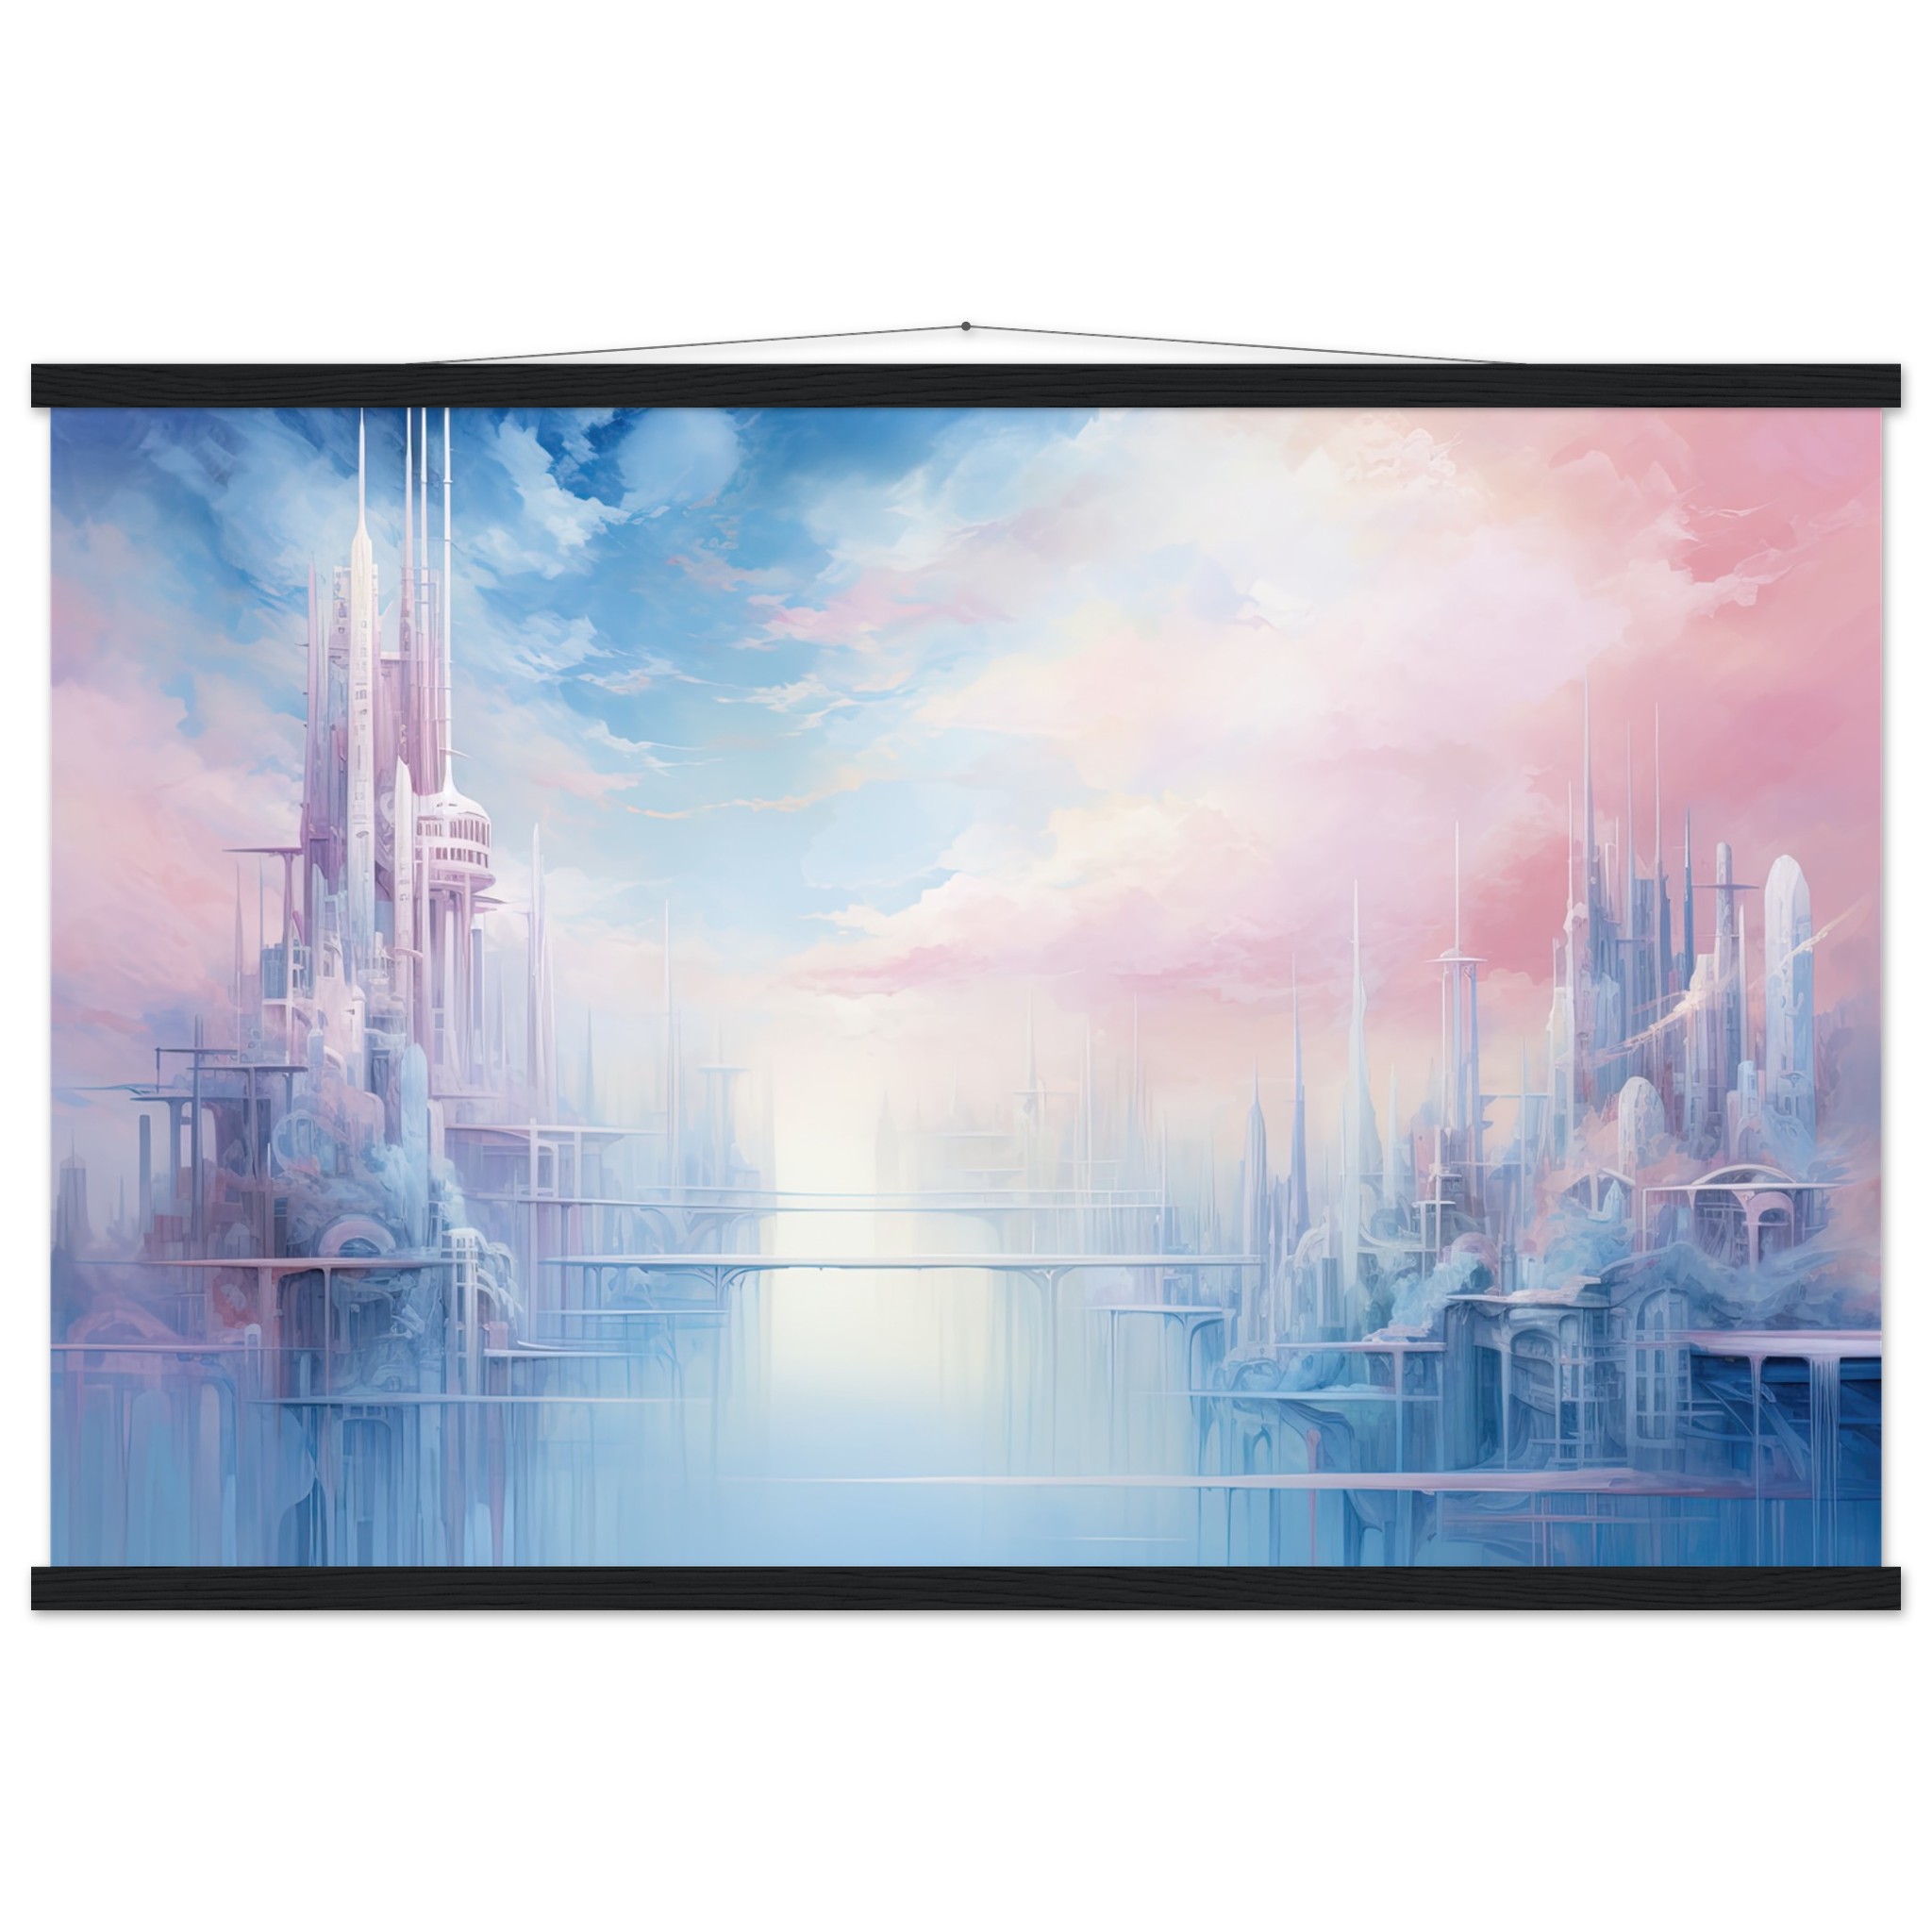 Pastel City in the Clouds Hanging Print – 60×90 cm / 24×36″, Black wall hanger